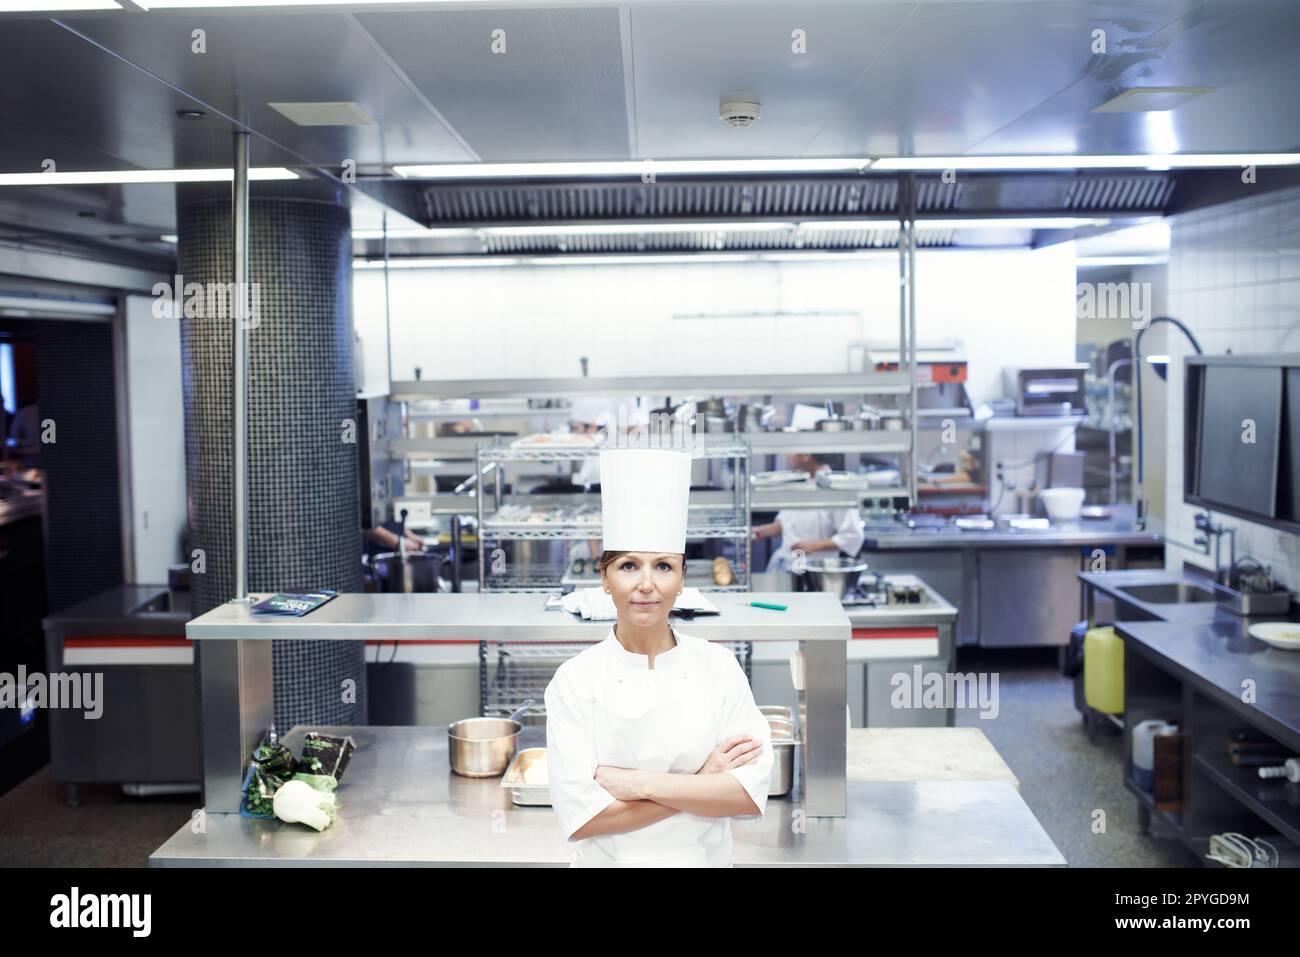 https://c8.alamy.com/comp/2PYGD9M/welcome-to-my-kitchen-portrait-of-a-chef-in-a-professional-kitchen-2PYGD9M.jpg